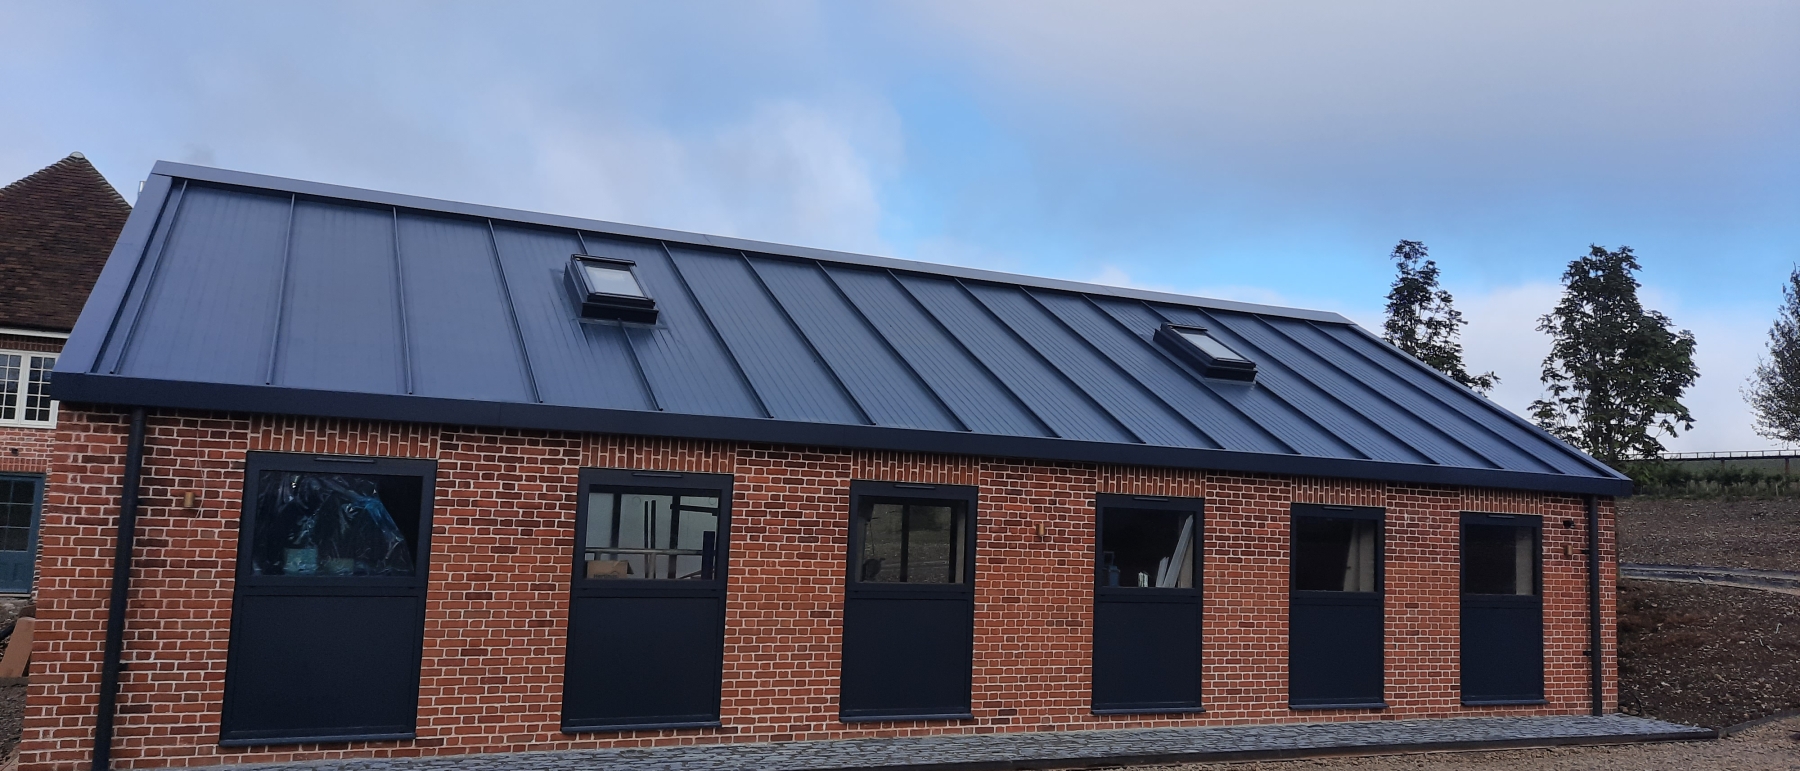 A custom steel roof and roofline for a home gym building in Oxford